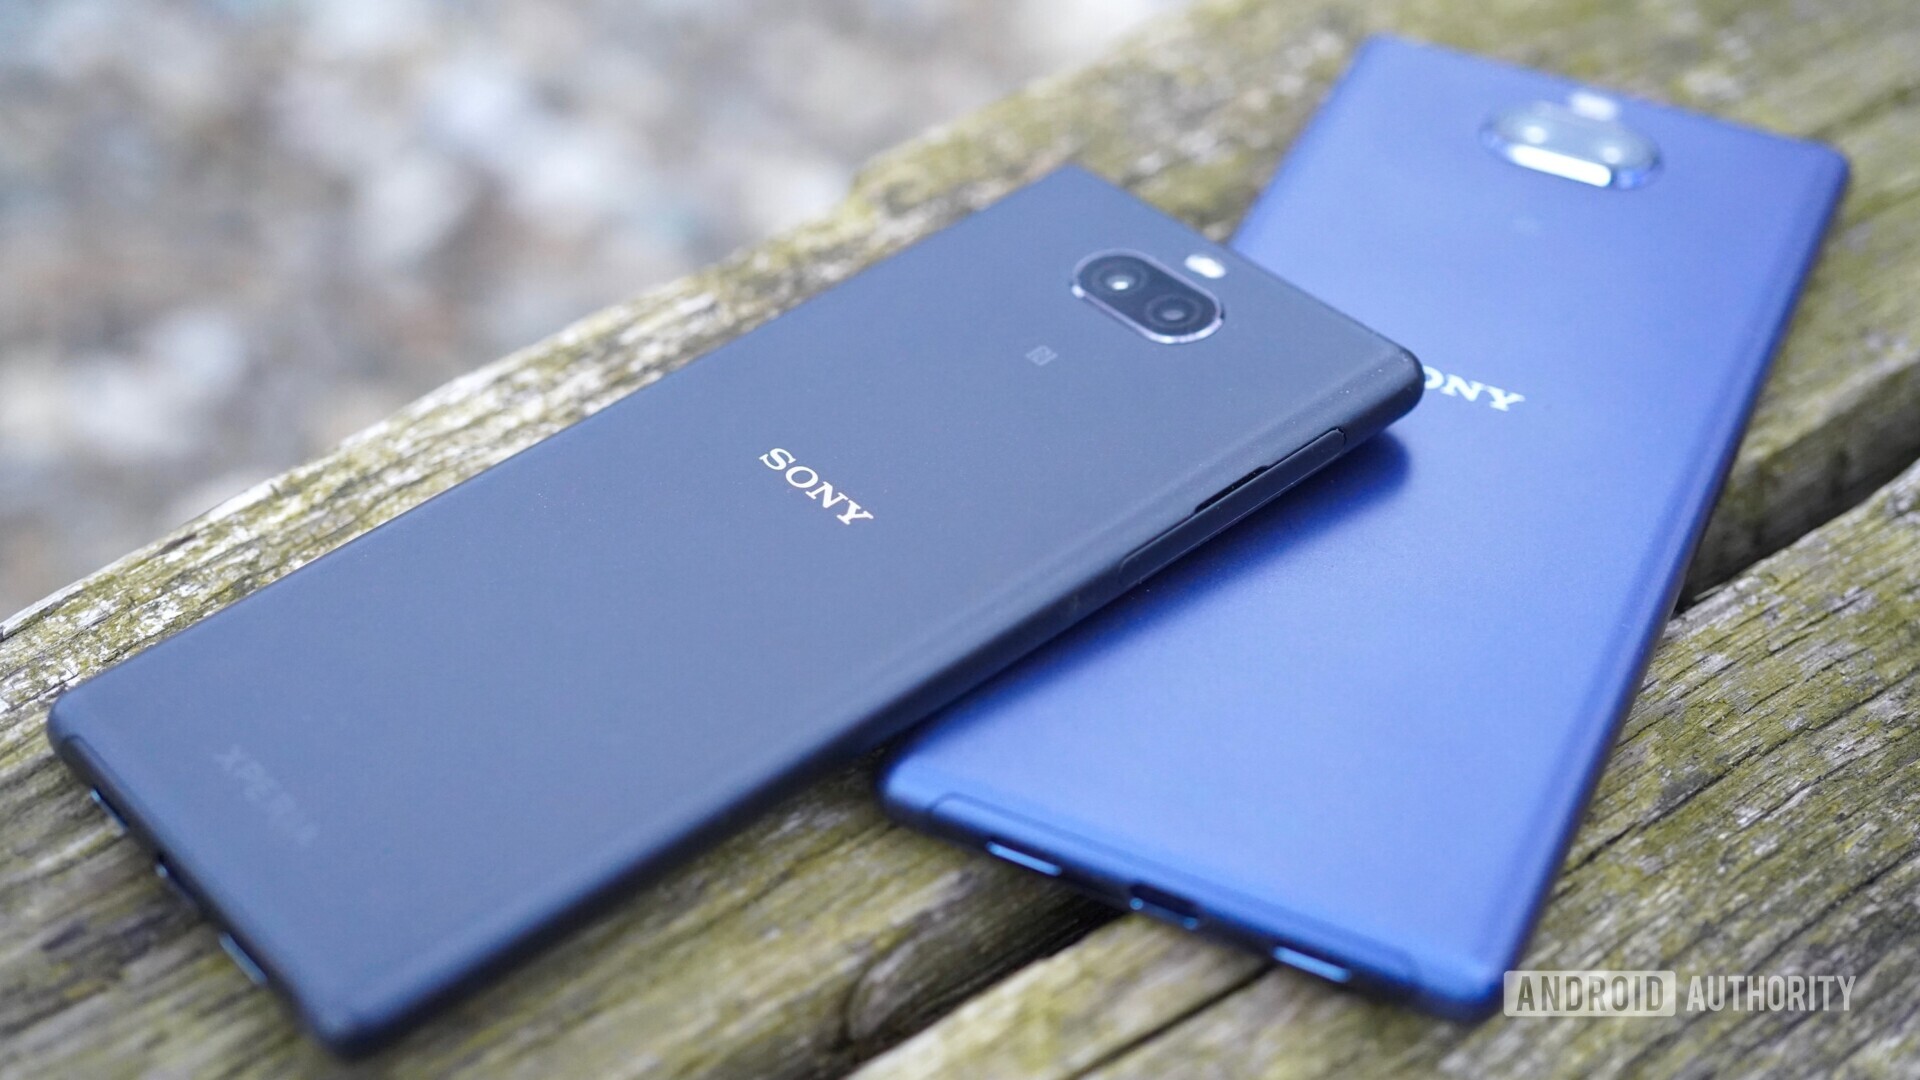 Sony Xperia 10 and Xperia 10 Plus review: Charting a new path